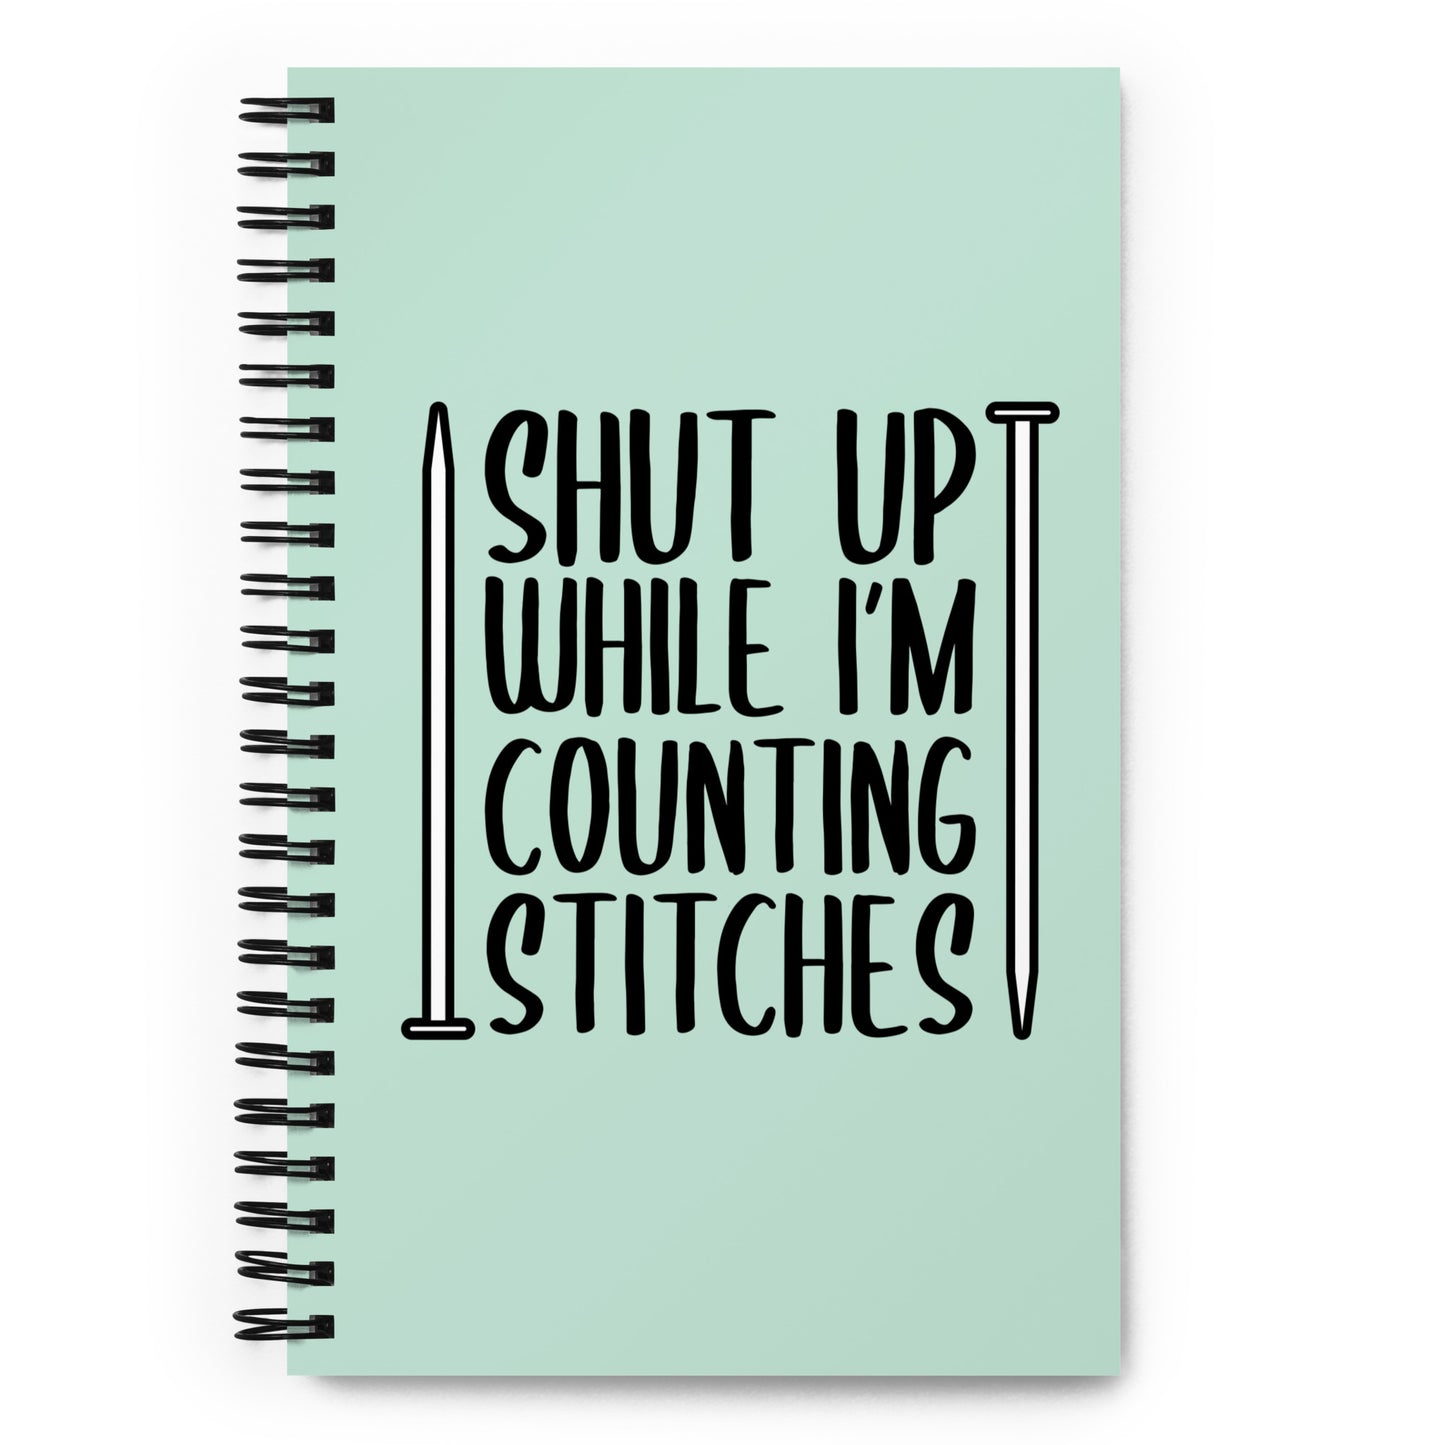 A light mint green wirebound notebook with black text surrounded by two knitting needles. The text reads "Shut up while I'm counting stiches".